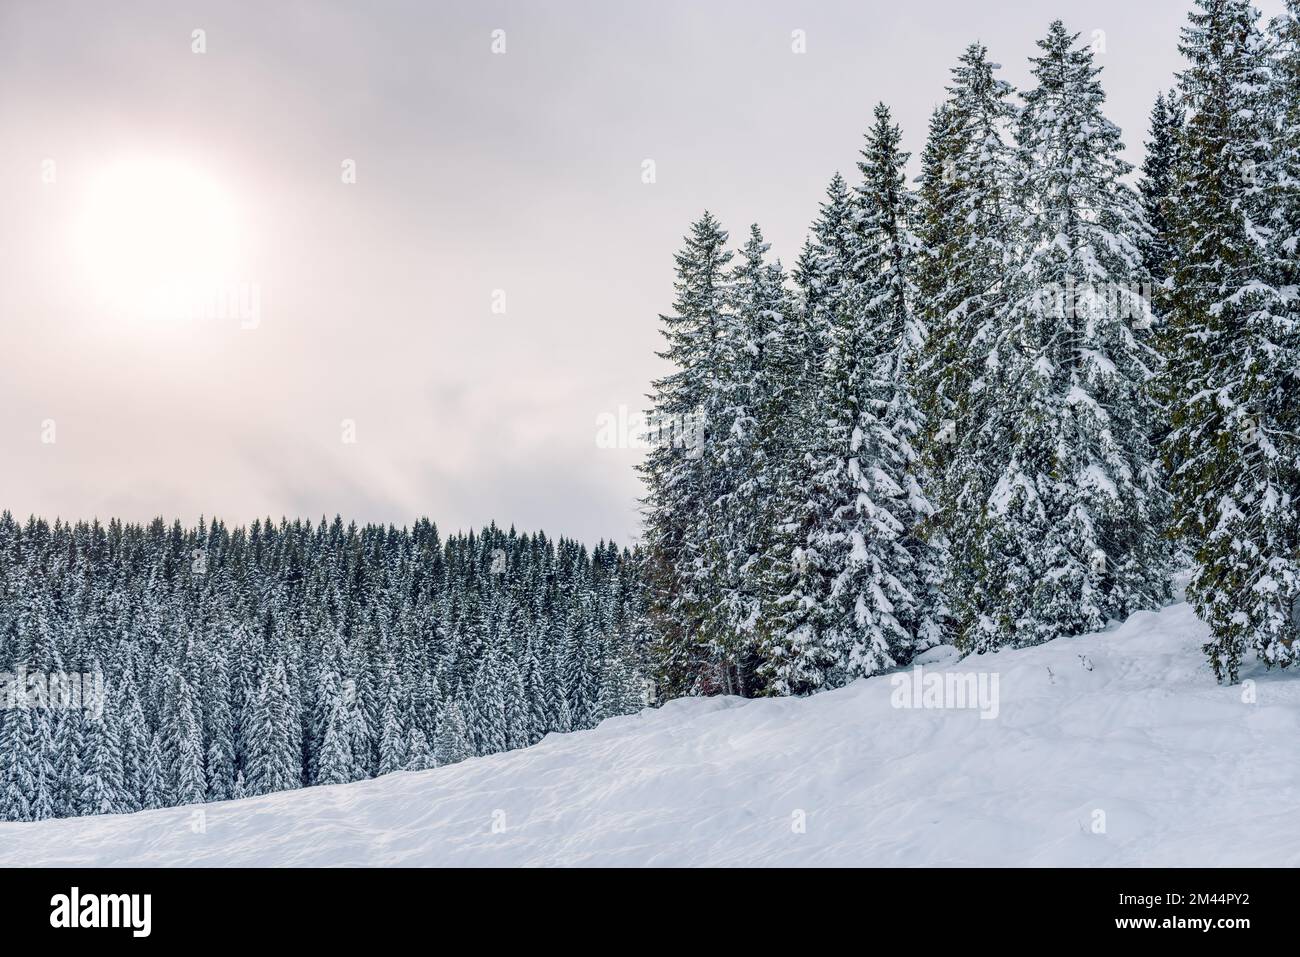 Snowy forested landscape in the mountains with pale sunlight filtering the cloud cover on a winter day. Natural background. Stock Photo